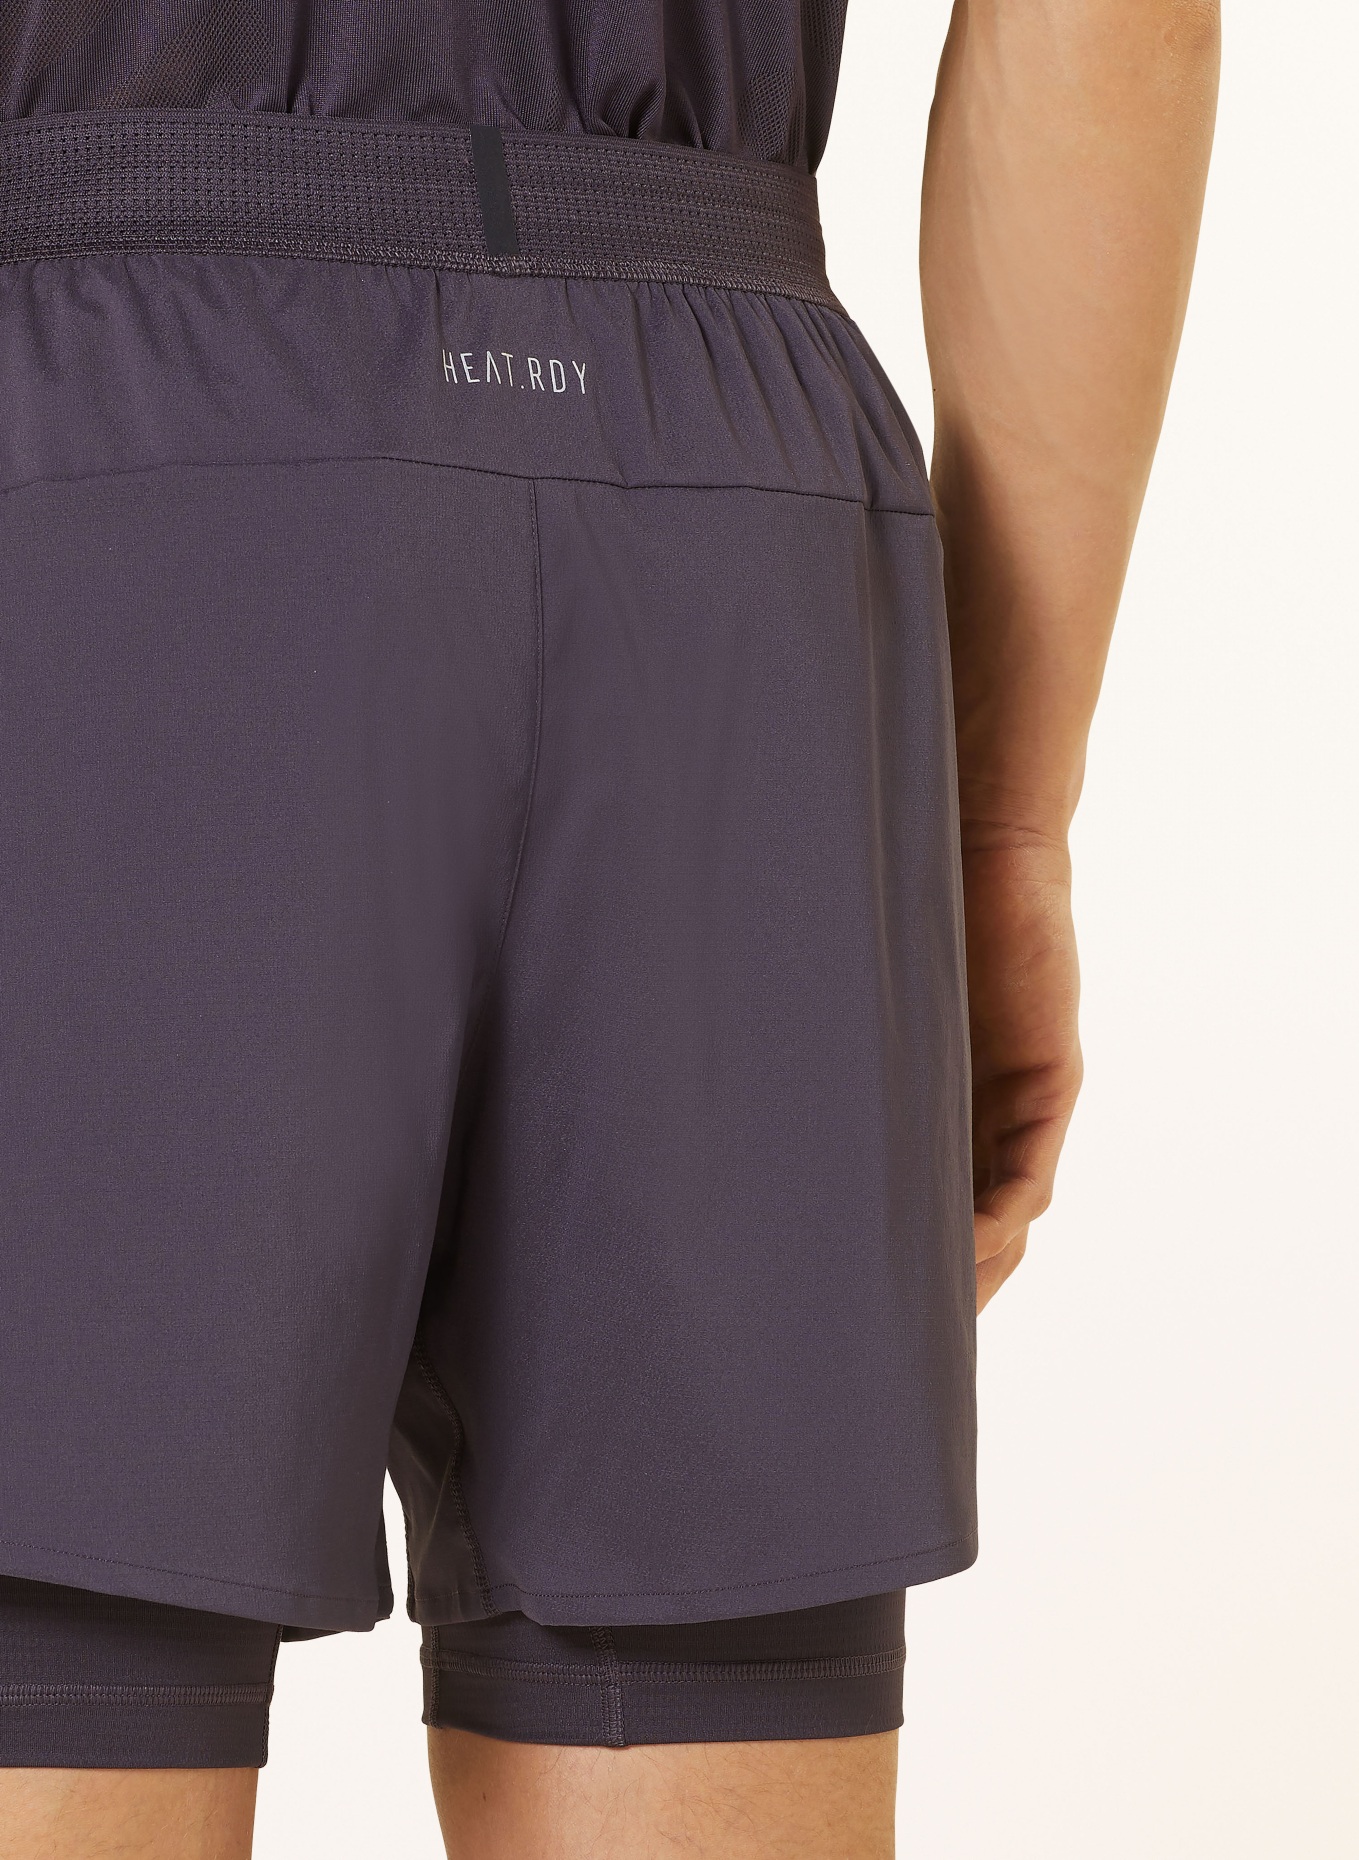 adidas 2-in-1 training shorts HIIT HEAT.RDY, Color: DARK GRAY (Image 6)